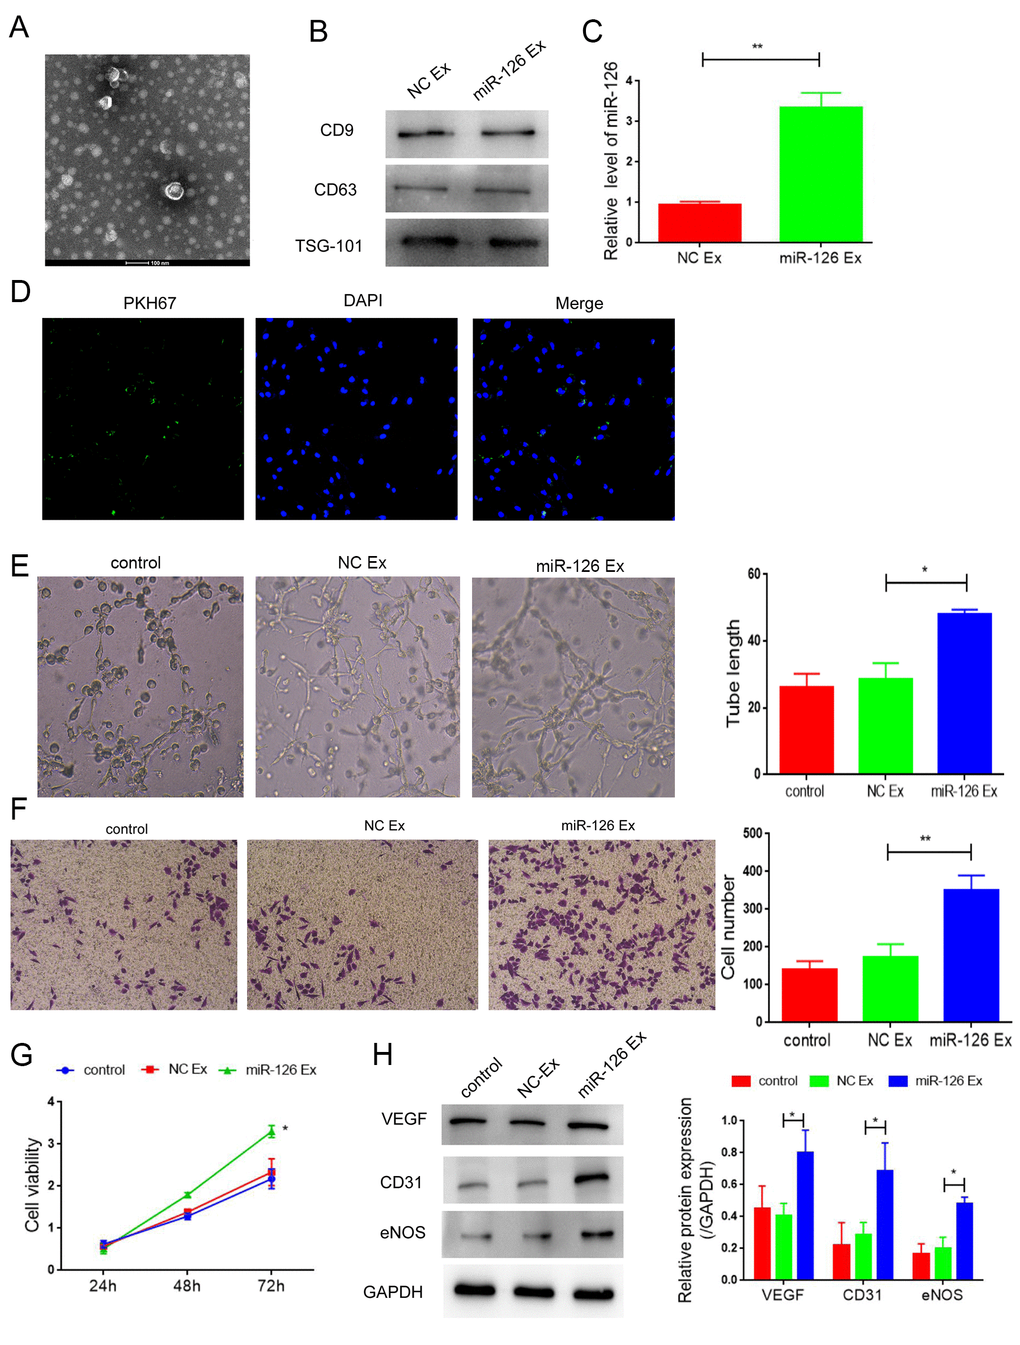 Exosomes derived from miR-126-modifified MDSCs promote angiogenesis and attenuate apoptosis in HUVECs. (A) Transmission electron photomicrograph of EXs. (B) Protein expression of CD9, CD63 and TSG-101. (C) mRNA-126 levels. (D) Confocal images of PKH67-labeled EXs taken up by HUVECs. (E) Tube formation was measured after seeding HUVECs pretreated with PBS, miR-con EXs or miR-126 EXs. Photomicrographs of tube-like structures and quantification of the tube number. (F) Representative microscopy images and quantitative analysis of apoptosis of HUVECs. (G) Cell viability. (H) Protein expression of α-SMA, CD31, vWF and VEGF in HUVECs. Data are shown as the means ± SD. *P **P 